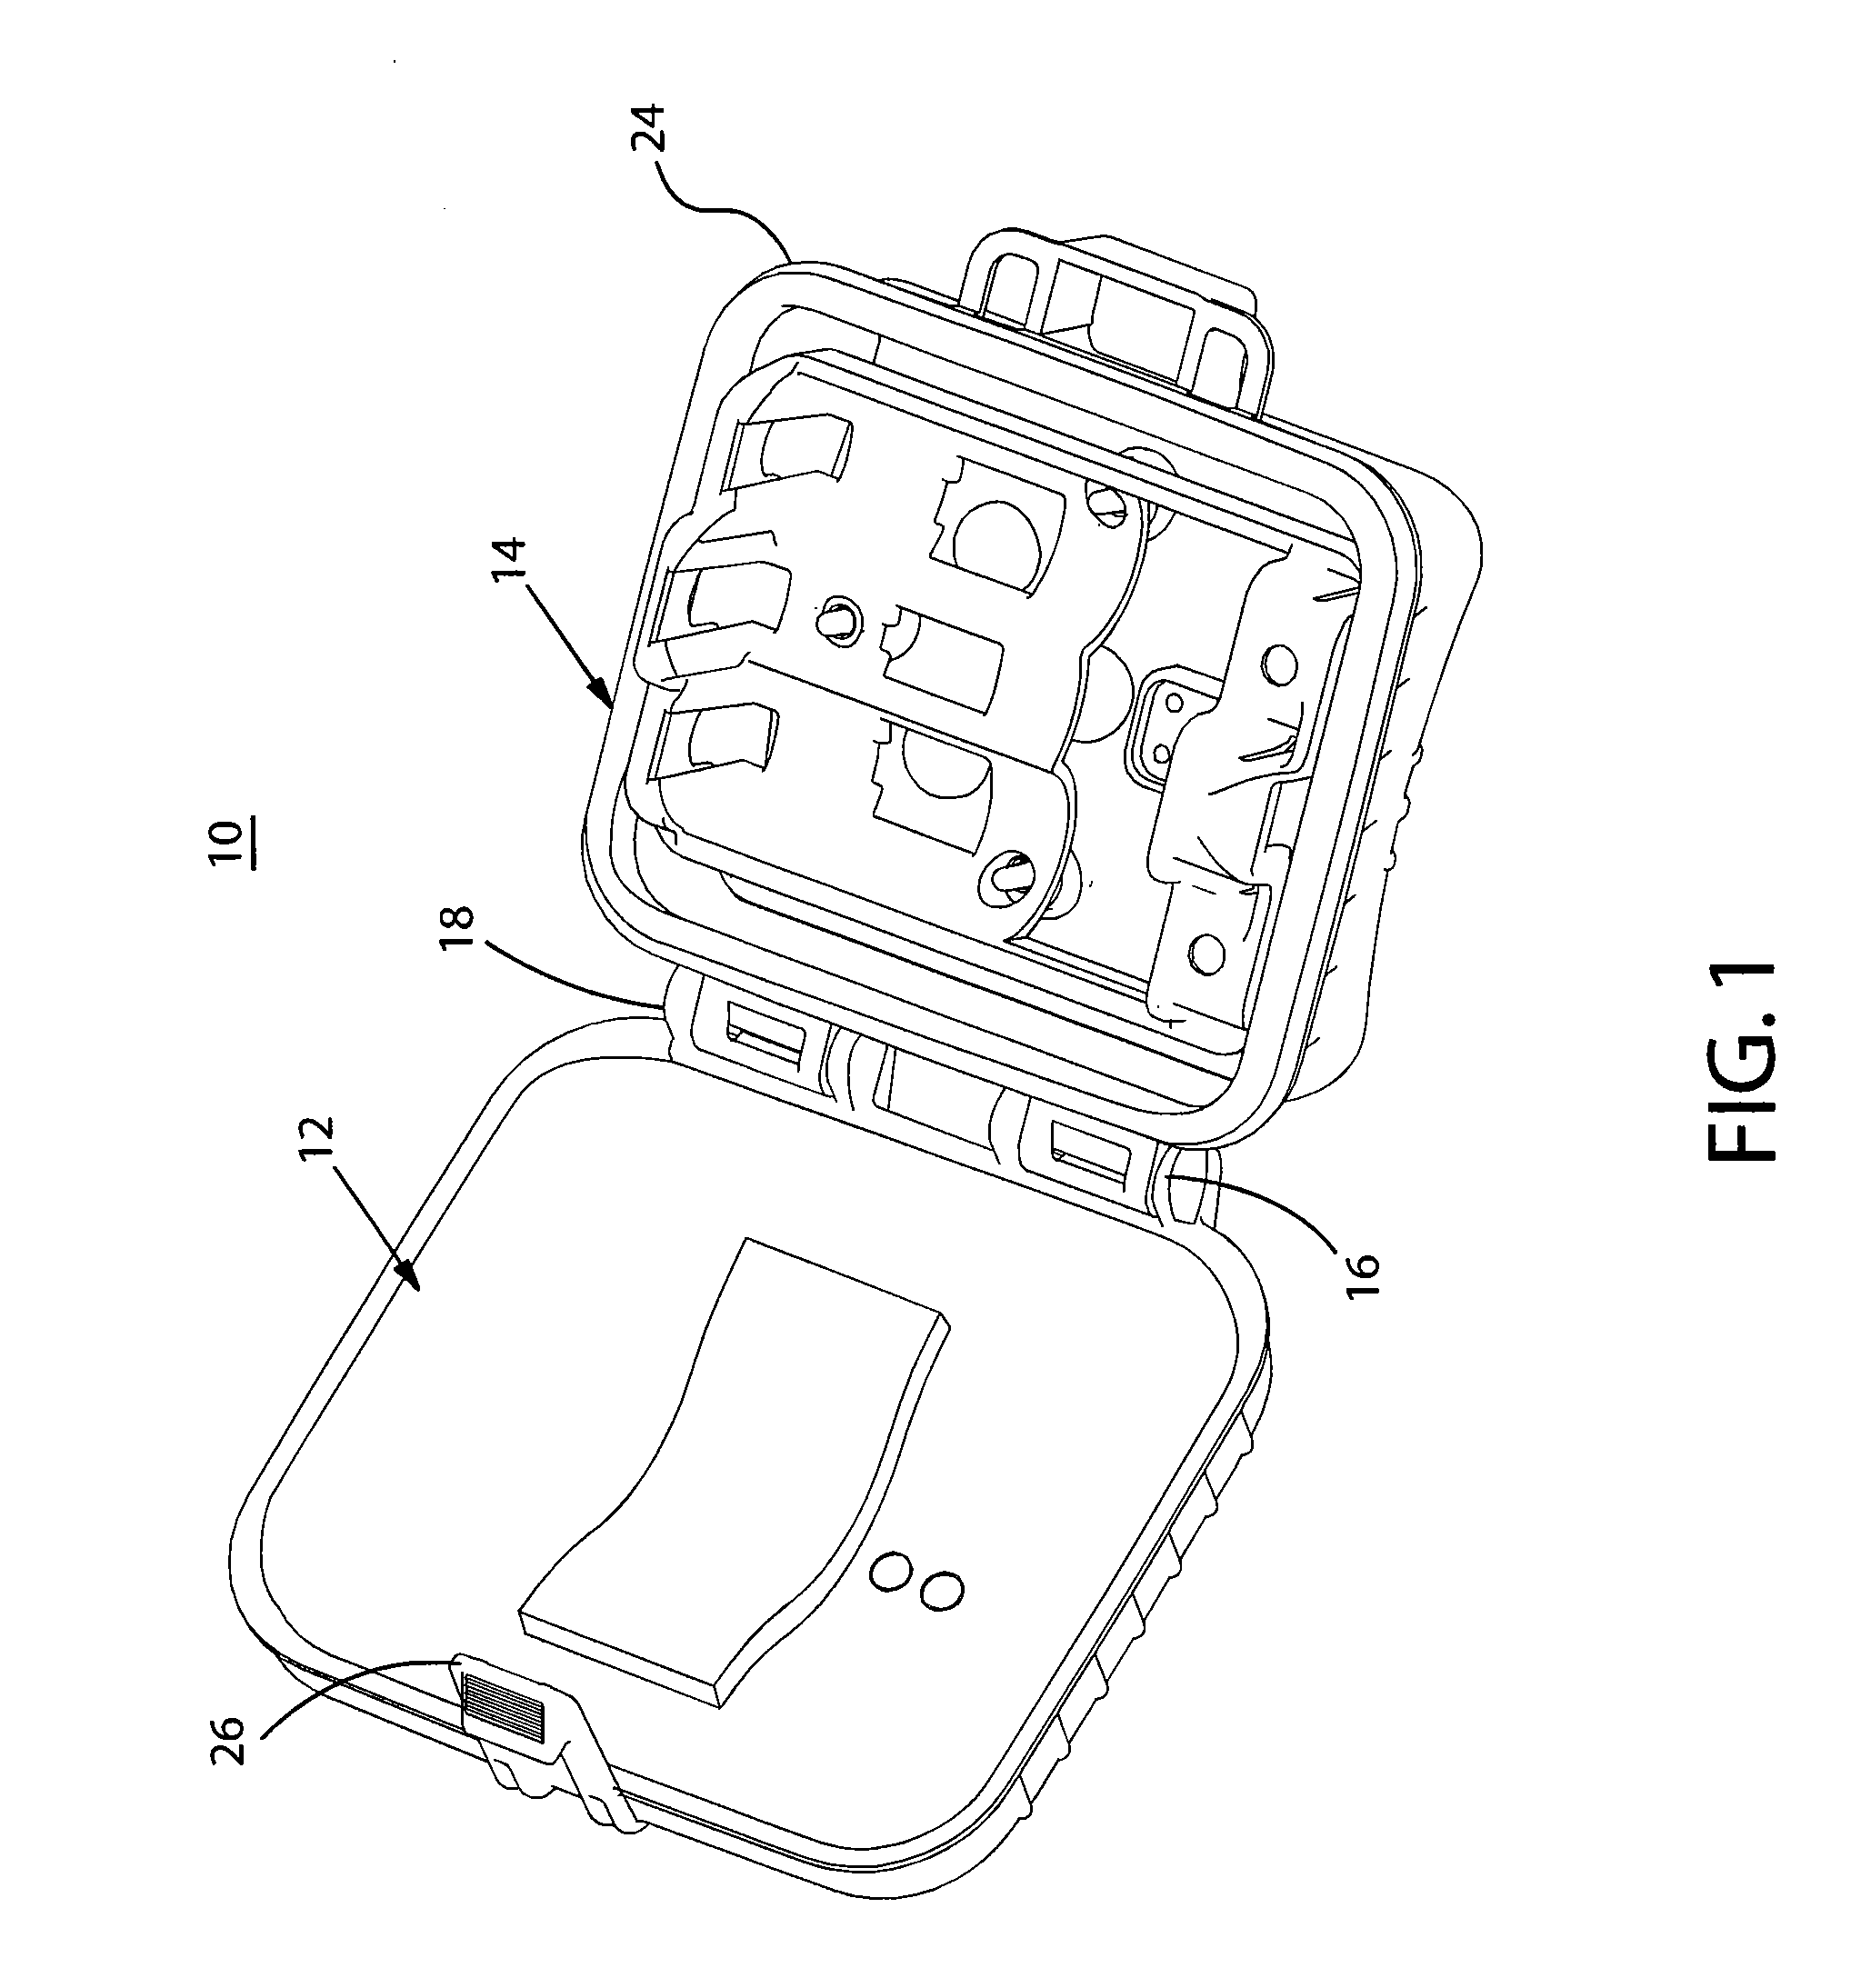 Self centering hinge design for concentric sealing of an enclosure